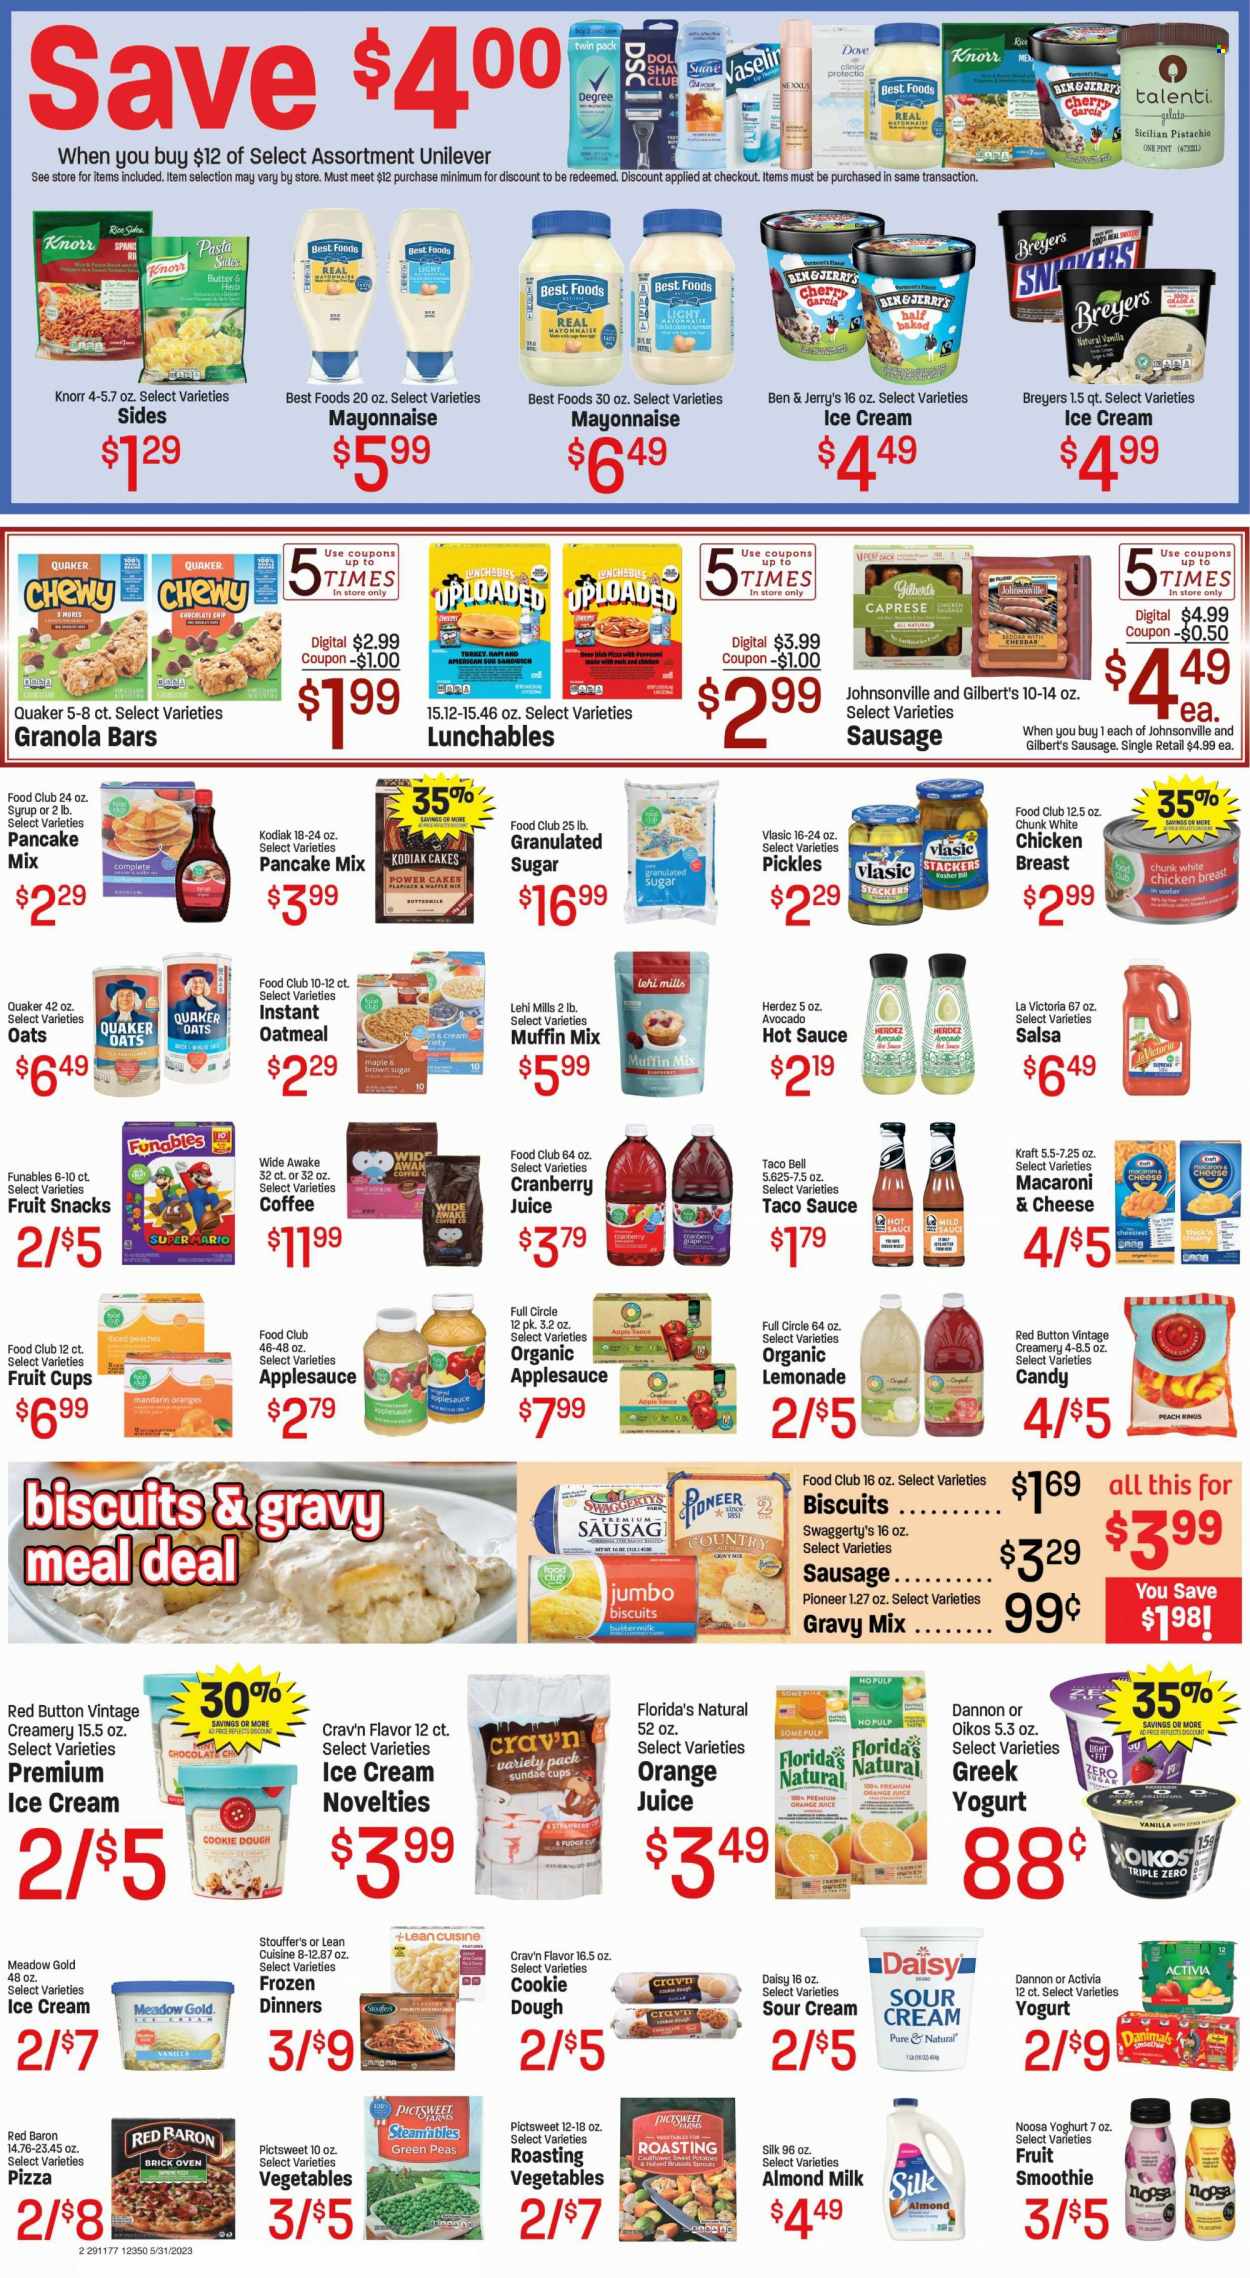 thumbnail - Fresh Market Flyer - 05/31/2023 - 06/06/2023 - Sales products - cake, muffin mix, pancake mix, sweet potato, brussel sprouts, avocado, mandarines, cherries, fruit cup, macaroni & cheese, pizza, sandwich, Knorr, Quaker, Lean Cuisine, pasta sides, Lunchables, Kraft®, Johnsonville, sausage, Gilbert’s, greek yoghurt, Activia, Oikos, Dannon, Danimals, almond milk, buttermilk, Silk, cage free eggs, sour cream, mayonnaise, ice cream, Ben & Jerry's, Talenti Gelato, gelato, Stouffer's, Red Baron, Dove, fudge, chocolate chips, Snickers, biscuit, fruit snack, Florida's Natural, Candy, cane sugar, granulated sugar, oatmeal, pickles, granola bar, rice, dill, gravy mix, taco sauce, hot sauce, salsa, apple sauce, syrup, cranberry juice, lemonade, orange juice, juice, Club Zero, smoothie, water, chicken breasts, chicken, turkey, Suave, Nexxus, Degree. Page 2.